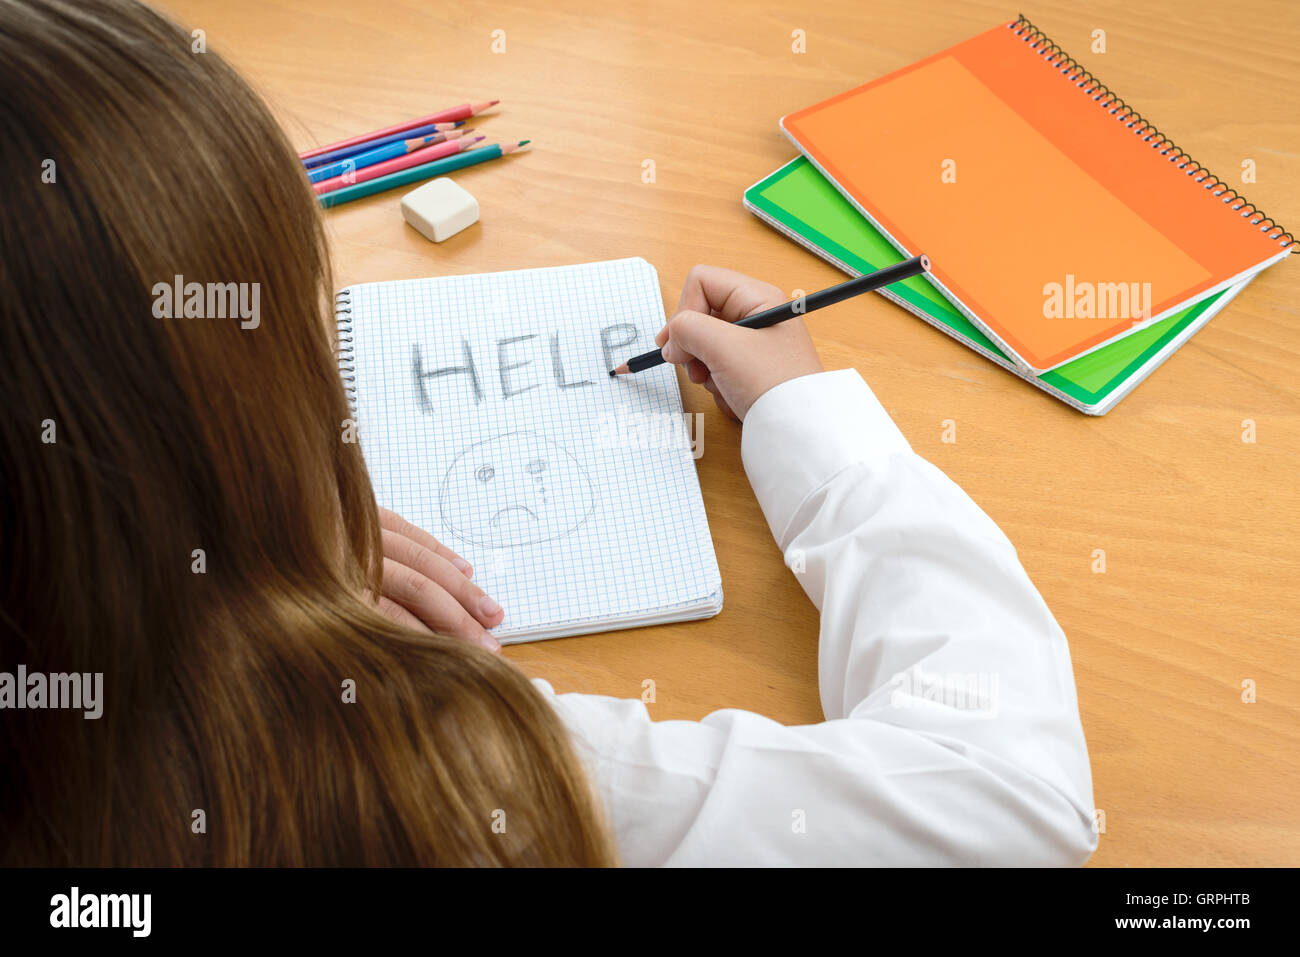 A Horizontal image /poster covering the Social Issues of child abuse, by a schoolchild sat at a desk asking for help Stock Photo